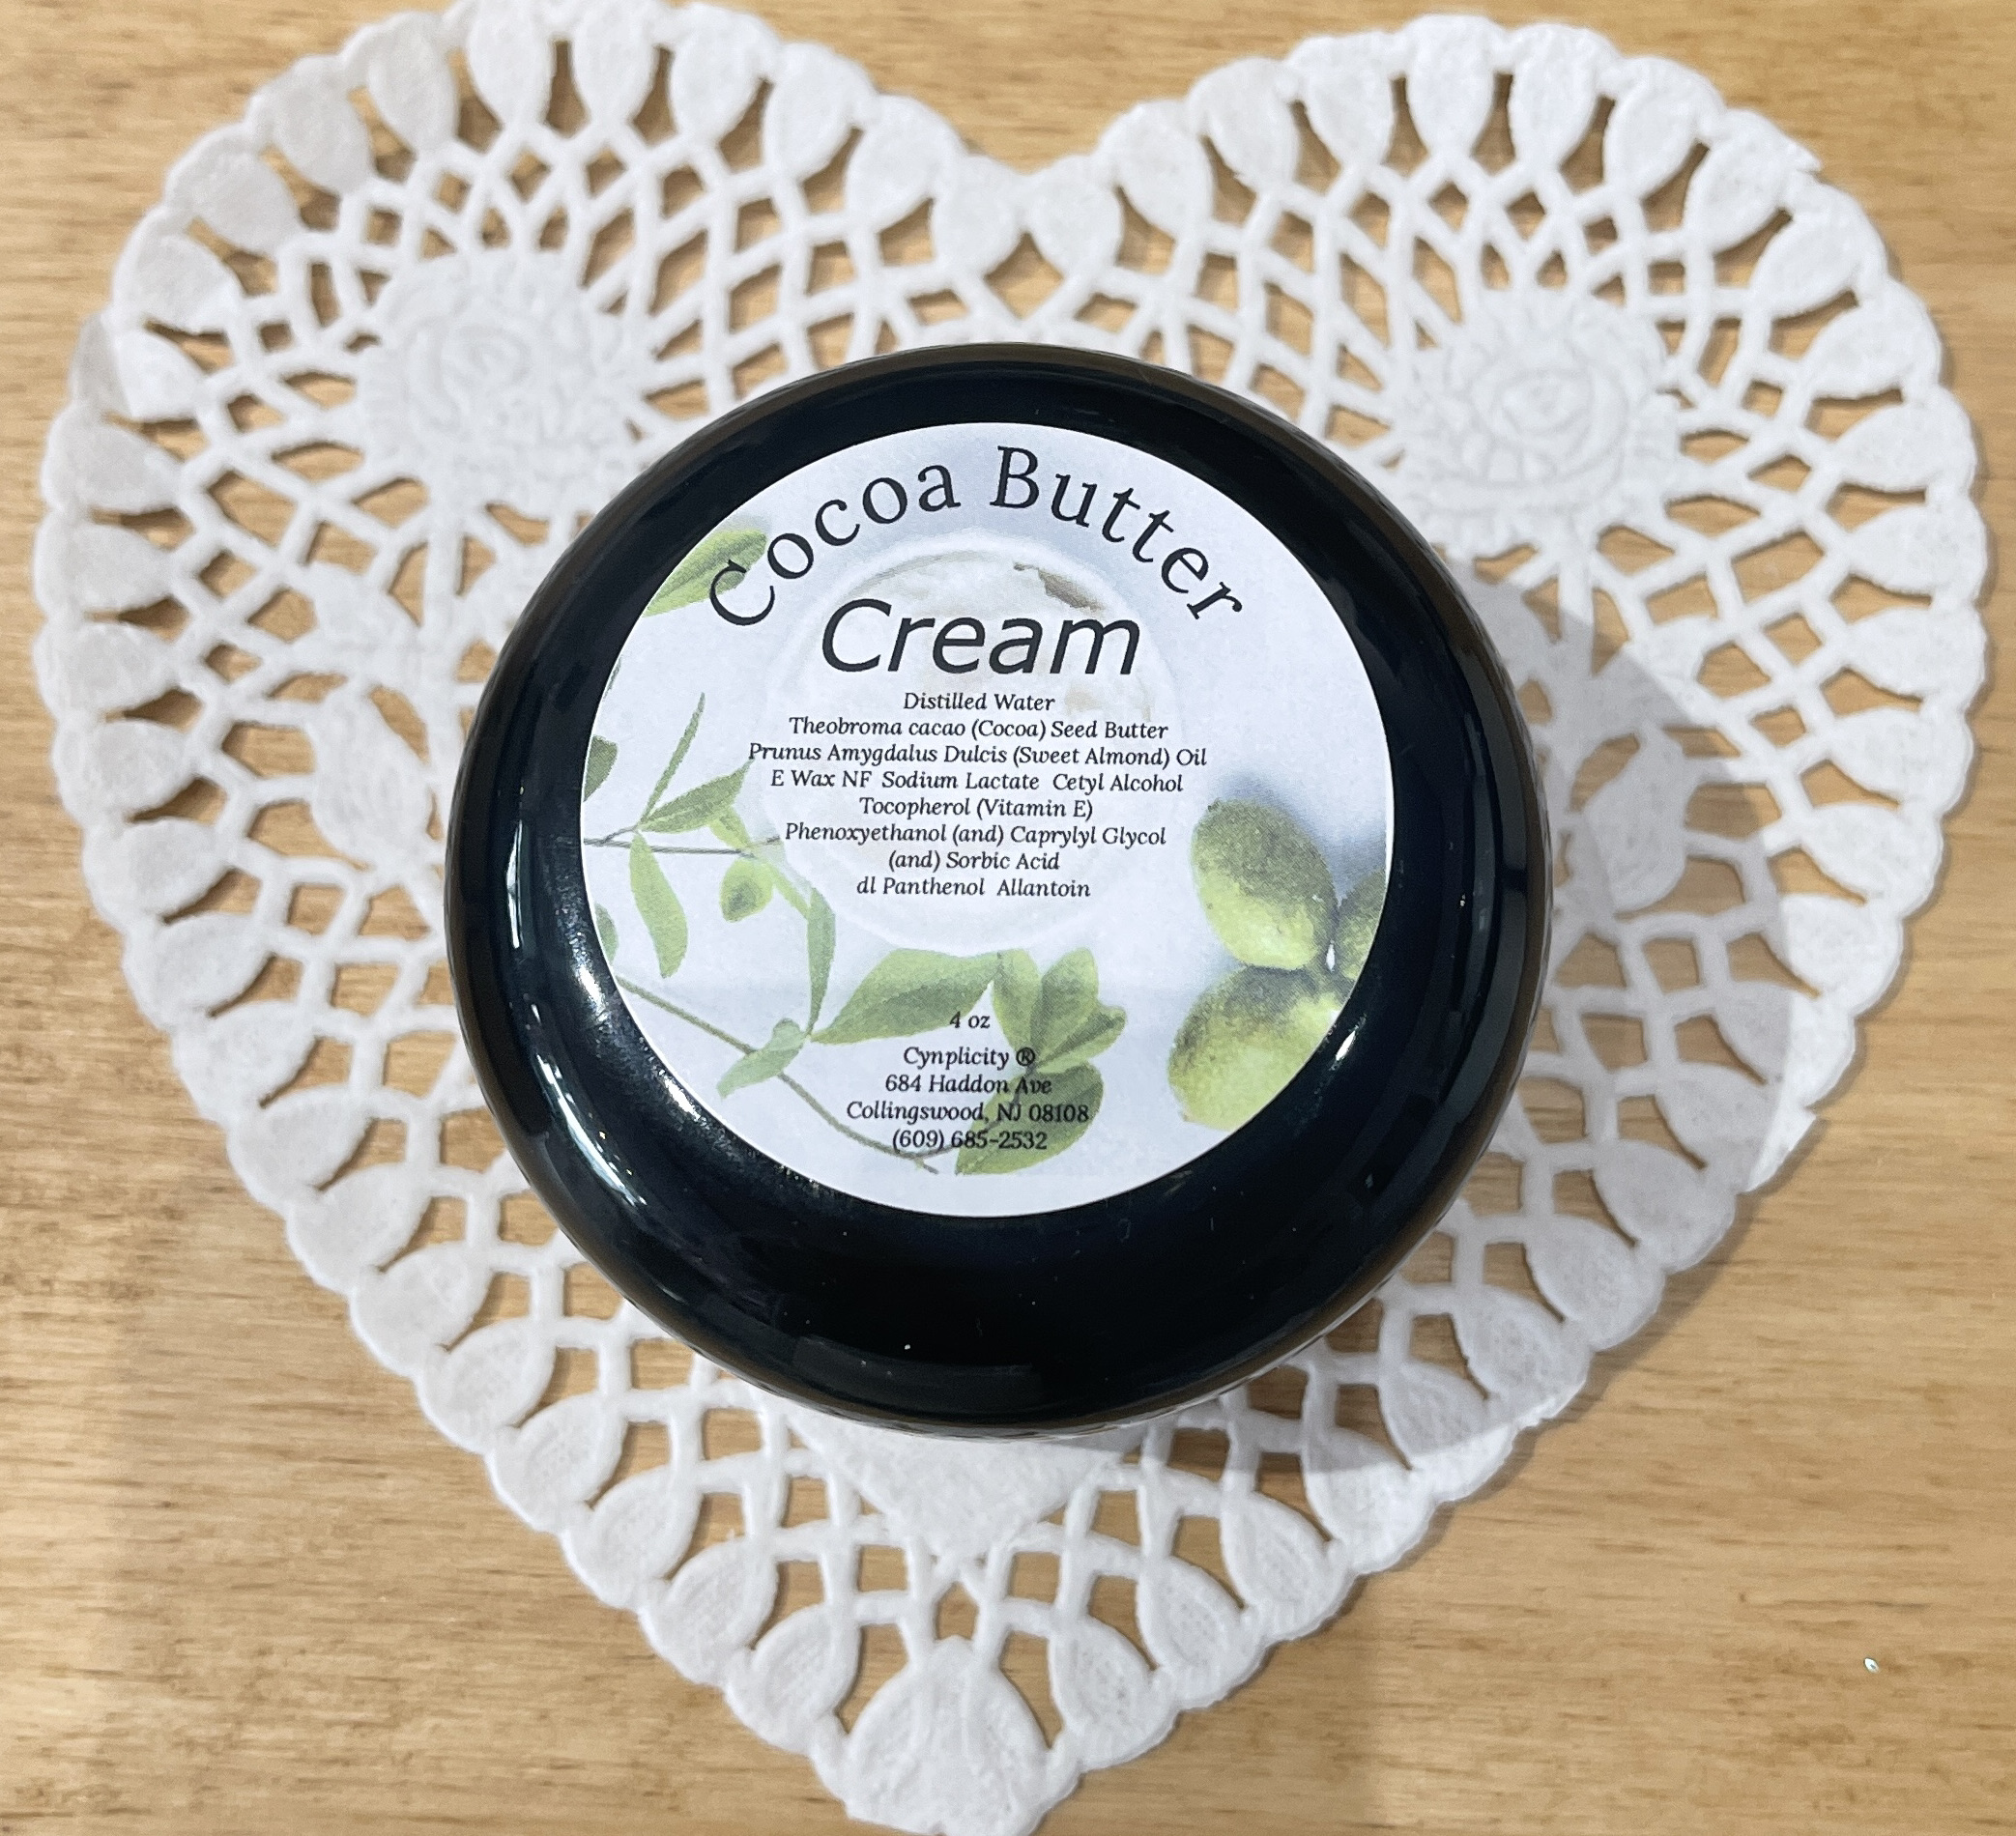 An Incredible Edible – Cocoa Butter For Your Skin